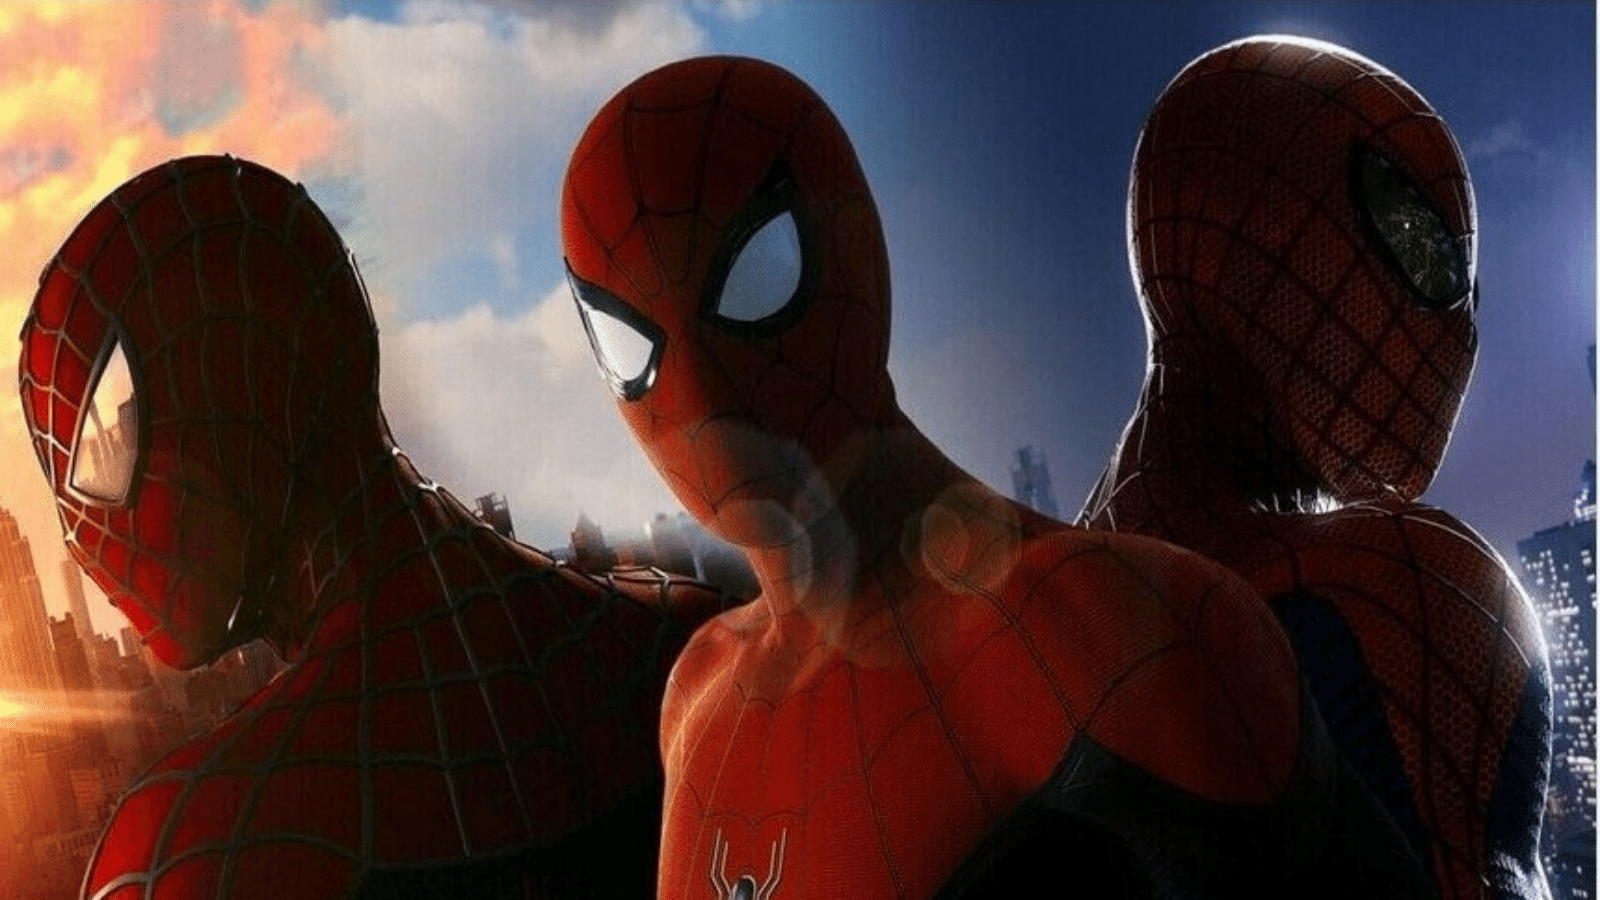 Spider-Man 4 Rumors send the internet into a tizzy